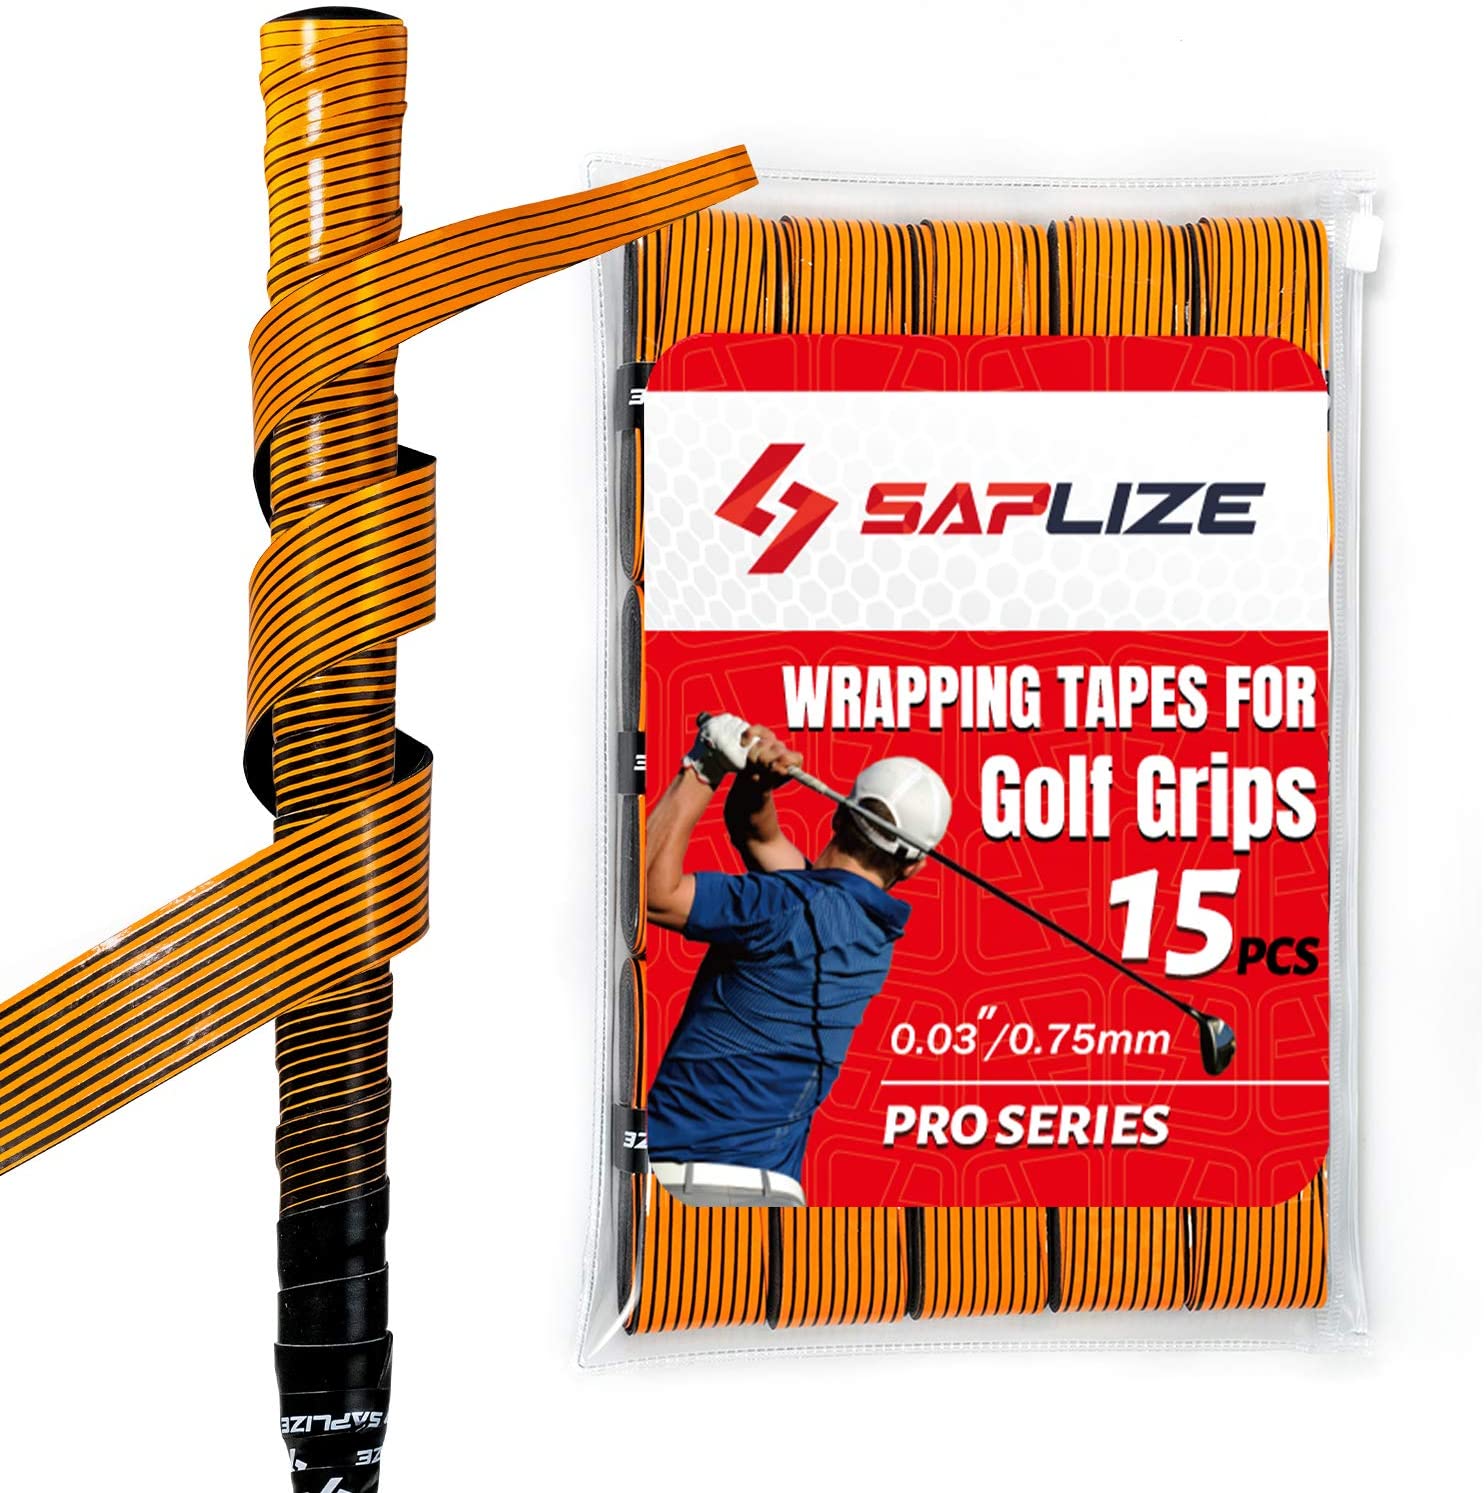 15 Pack Long Life Wrapping Tapes Golf Grips, Super Anti-slip Golf Grips, Regripping No Need Vise Clamp